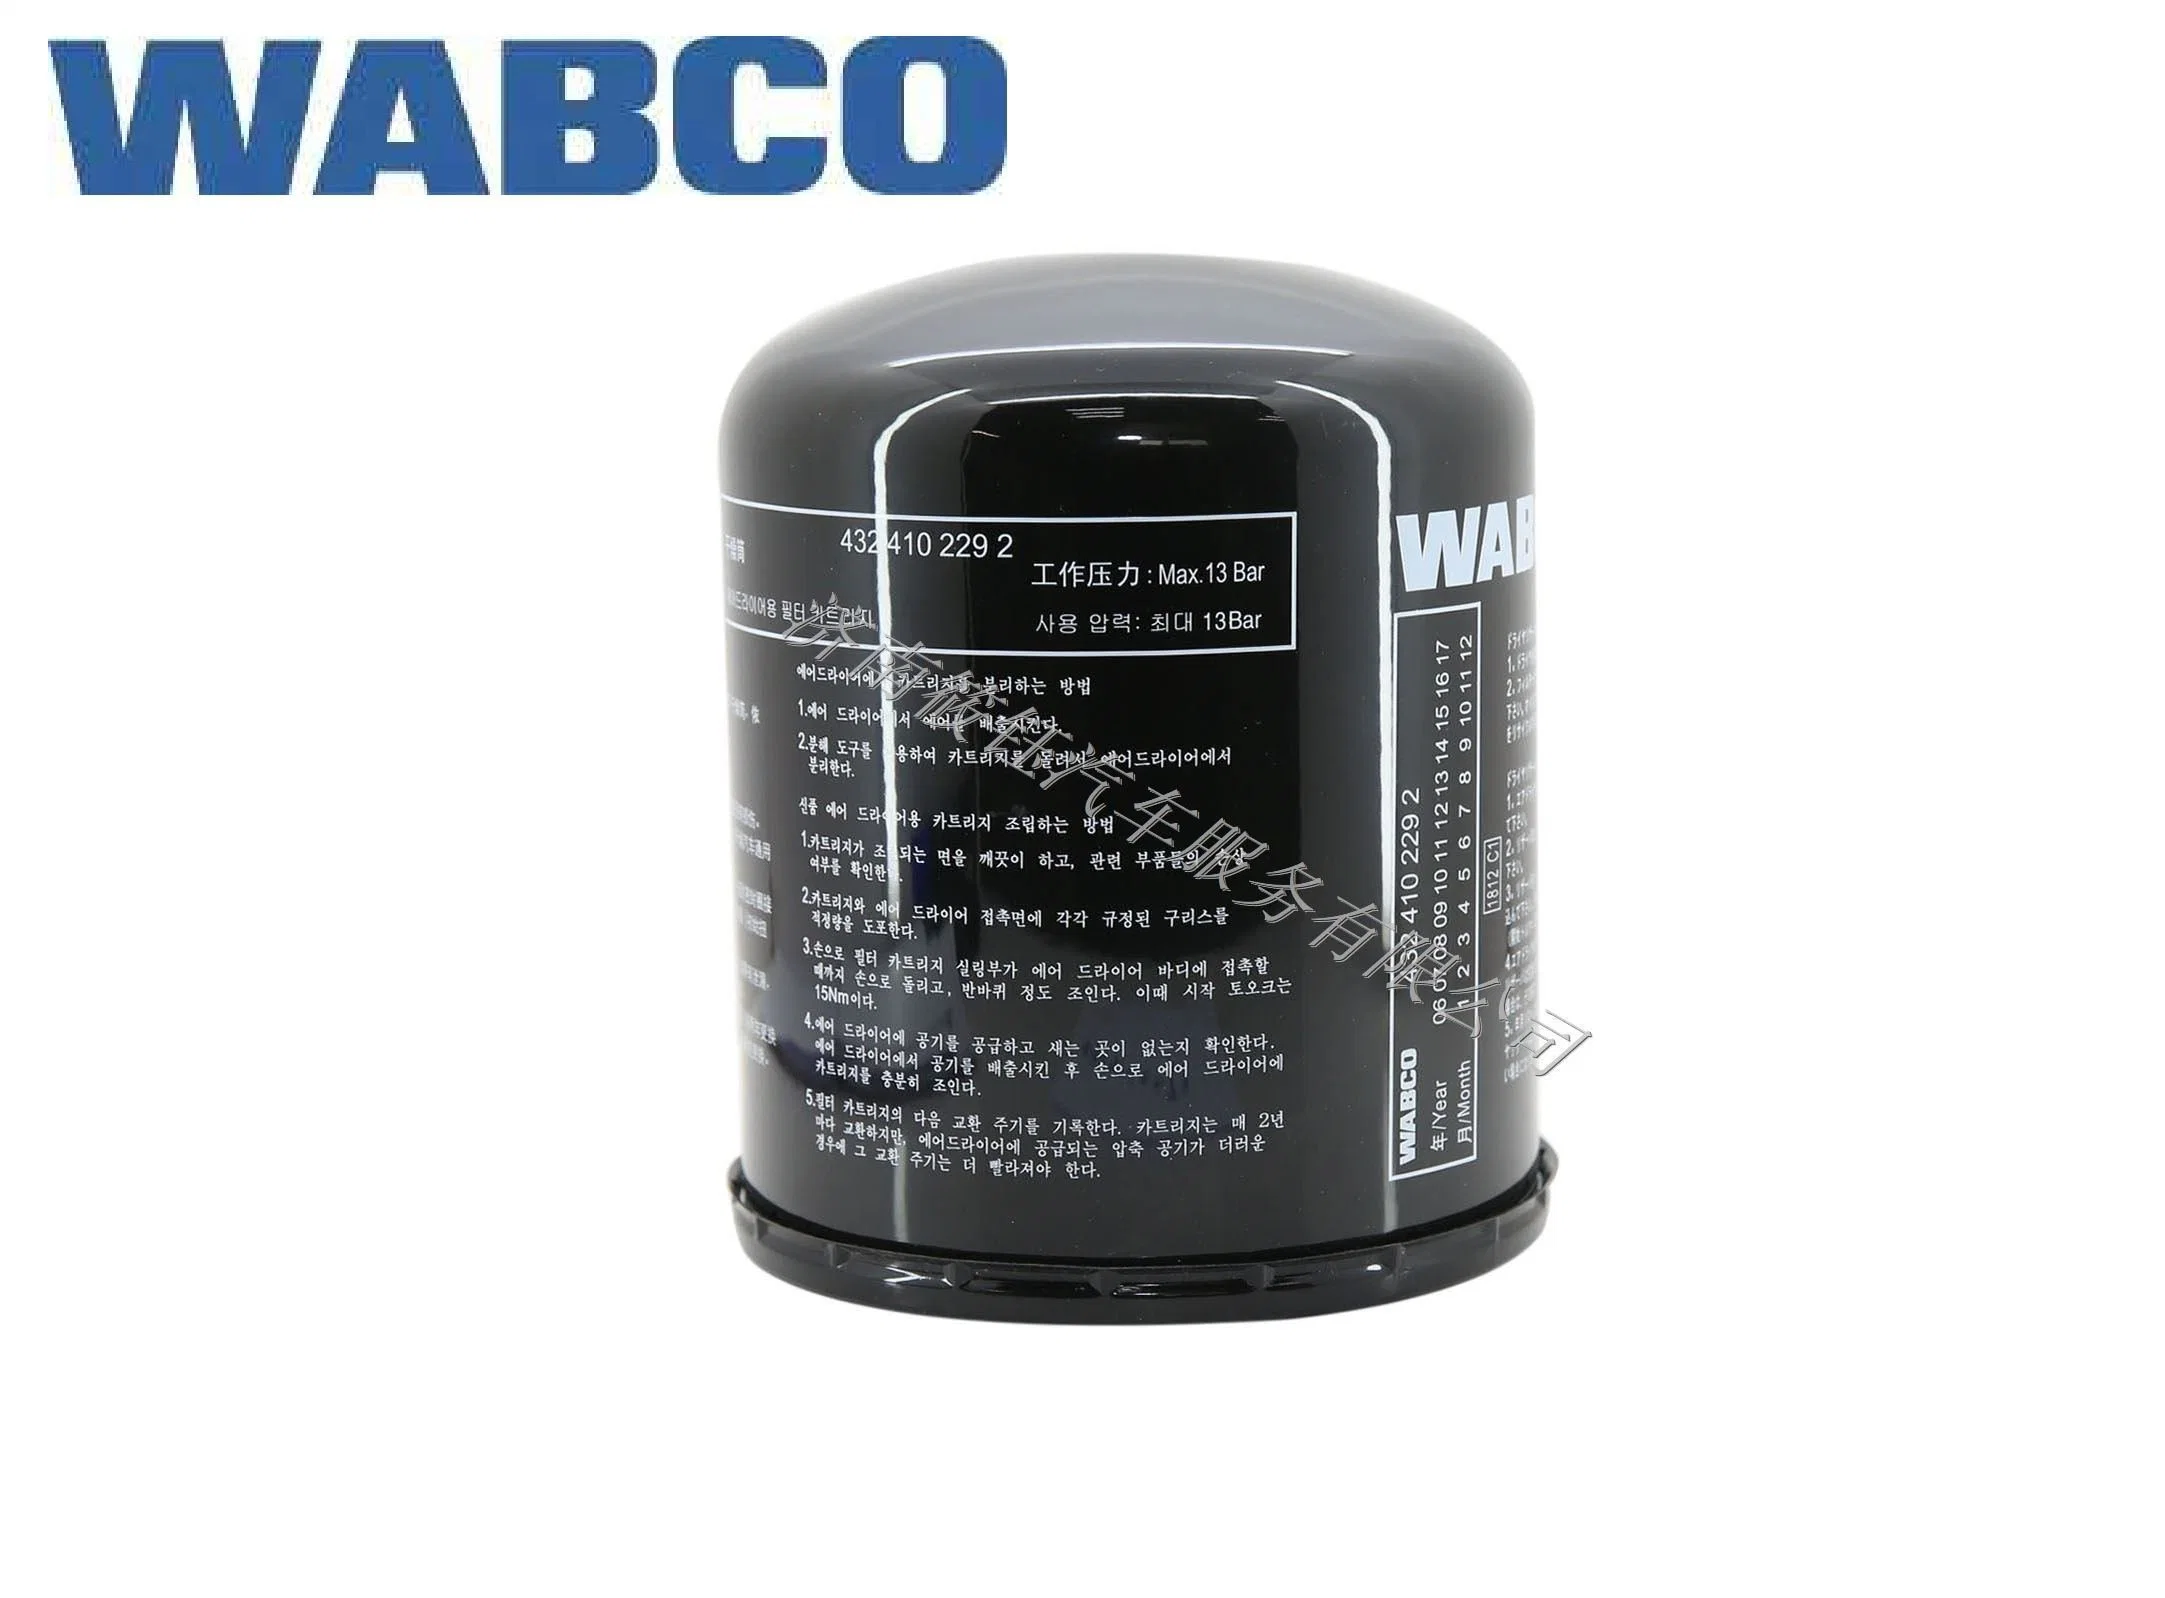 Wabco Air Filter Cartridge for Brake Valve System 4329012292 4329012282 4329012252 4329012242 Be Used for Daf Hino Paccar